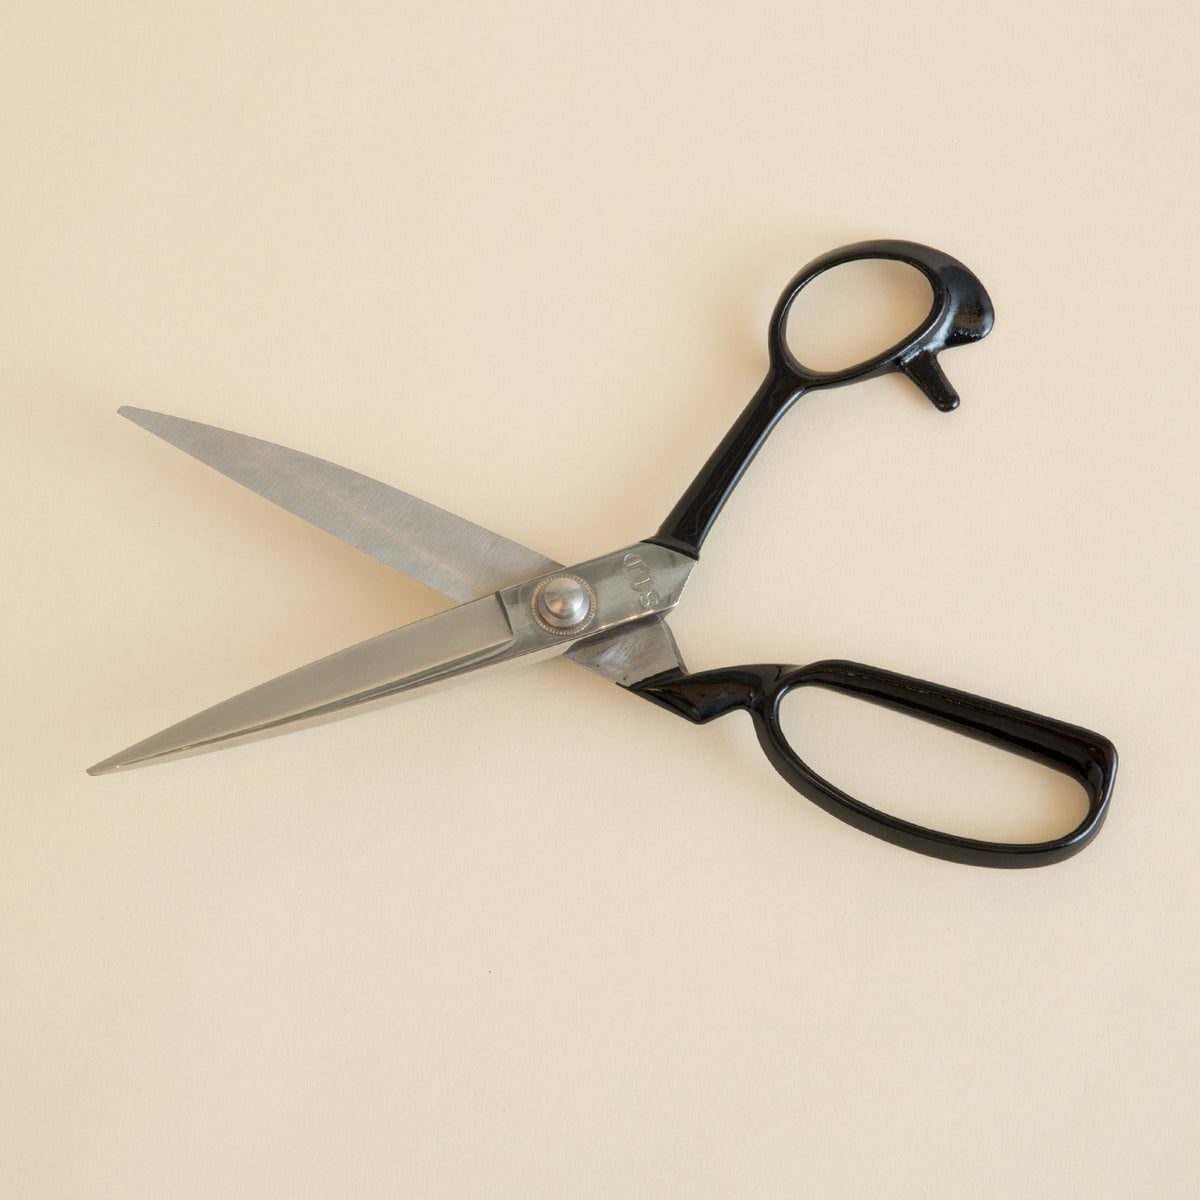 Fabric Scissors, Sewing Scissors Stainless Steel For Kitchen For